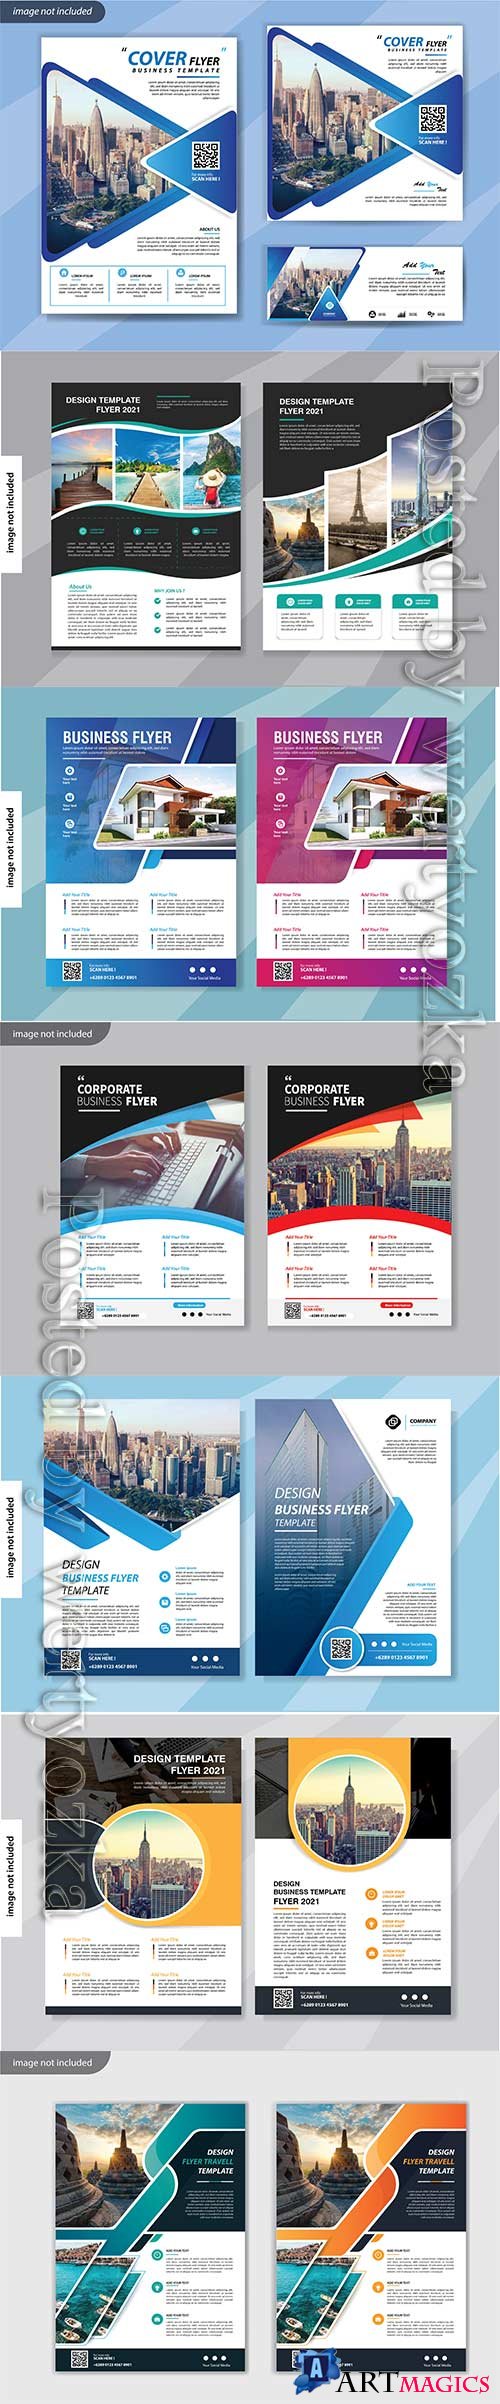 Flyer template design for cover layout annual report vol 2